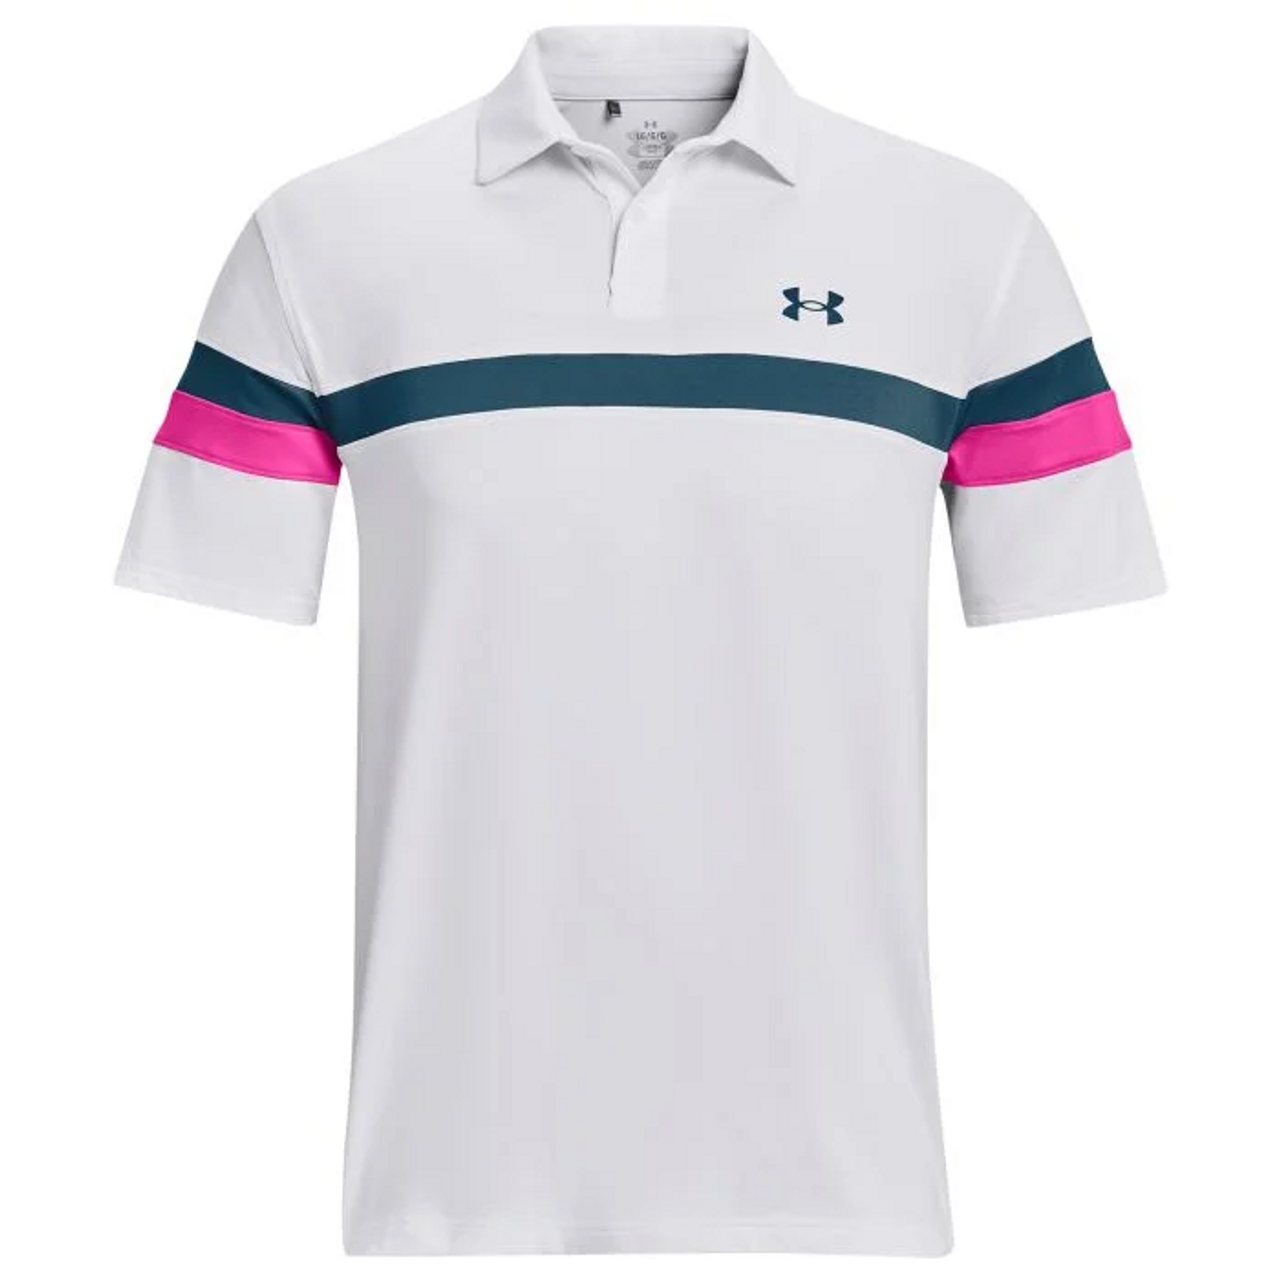 https://cdn11.bigcommerce.com/s-s7ib93jl4n/images/stencil/1280x1280/products/61833/100567/under_armour_t2g_blocked_golf_polo_1377379_100_hero__22709.1697046243.png?c=2?imbypass=on